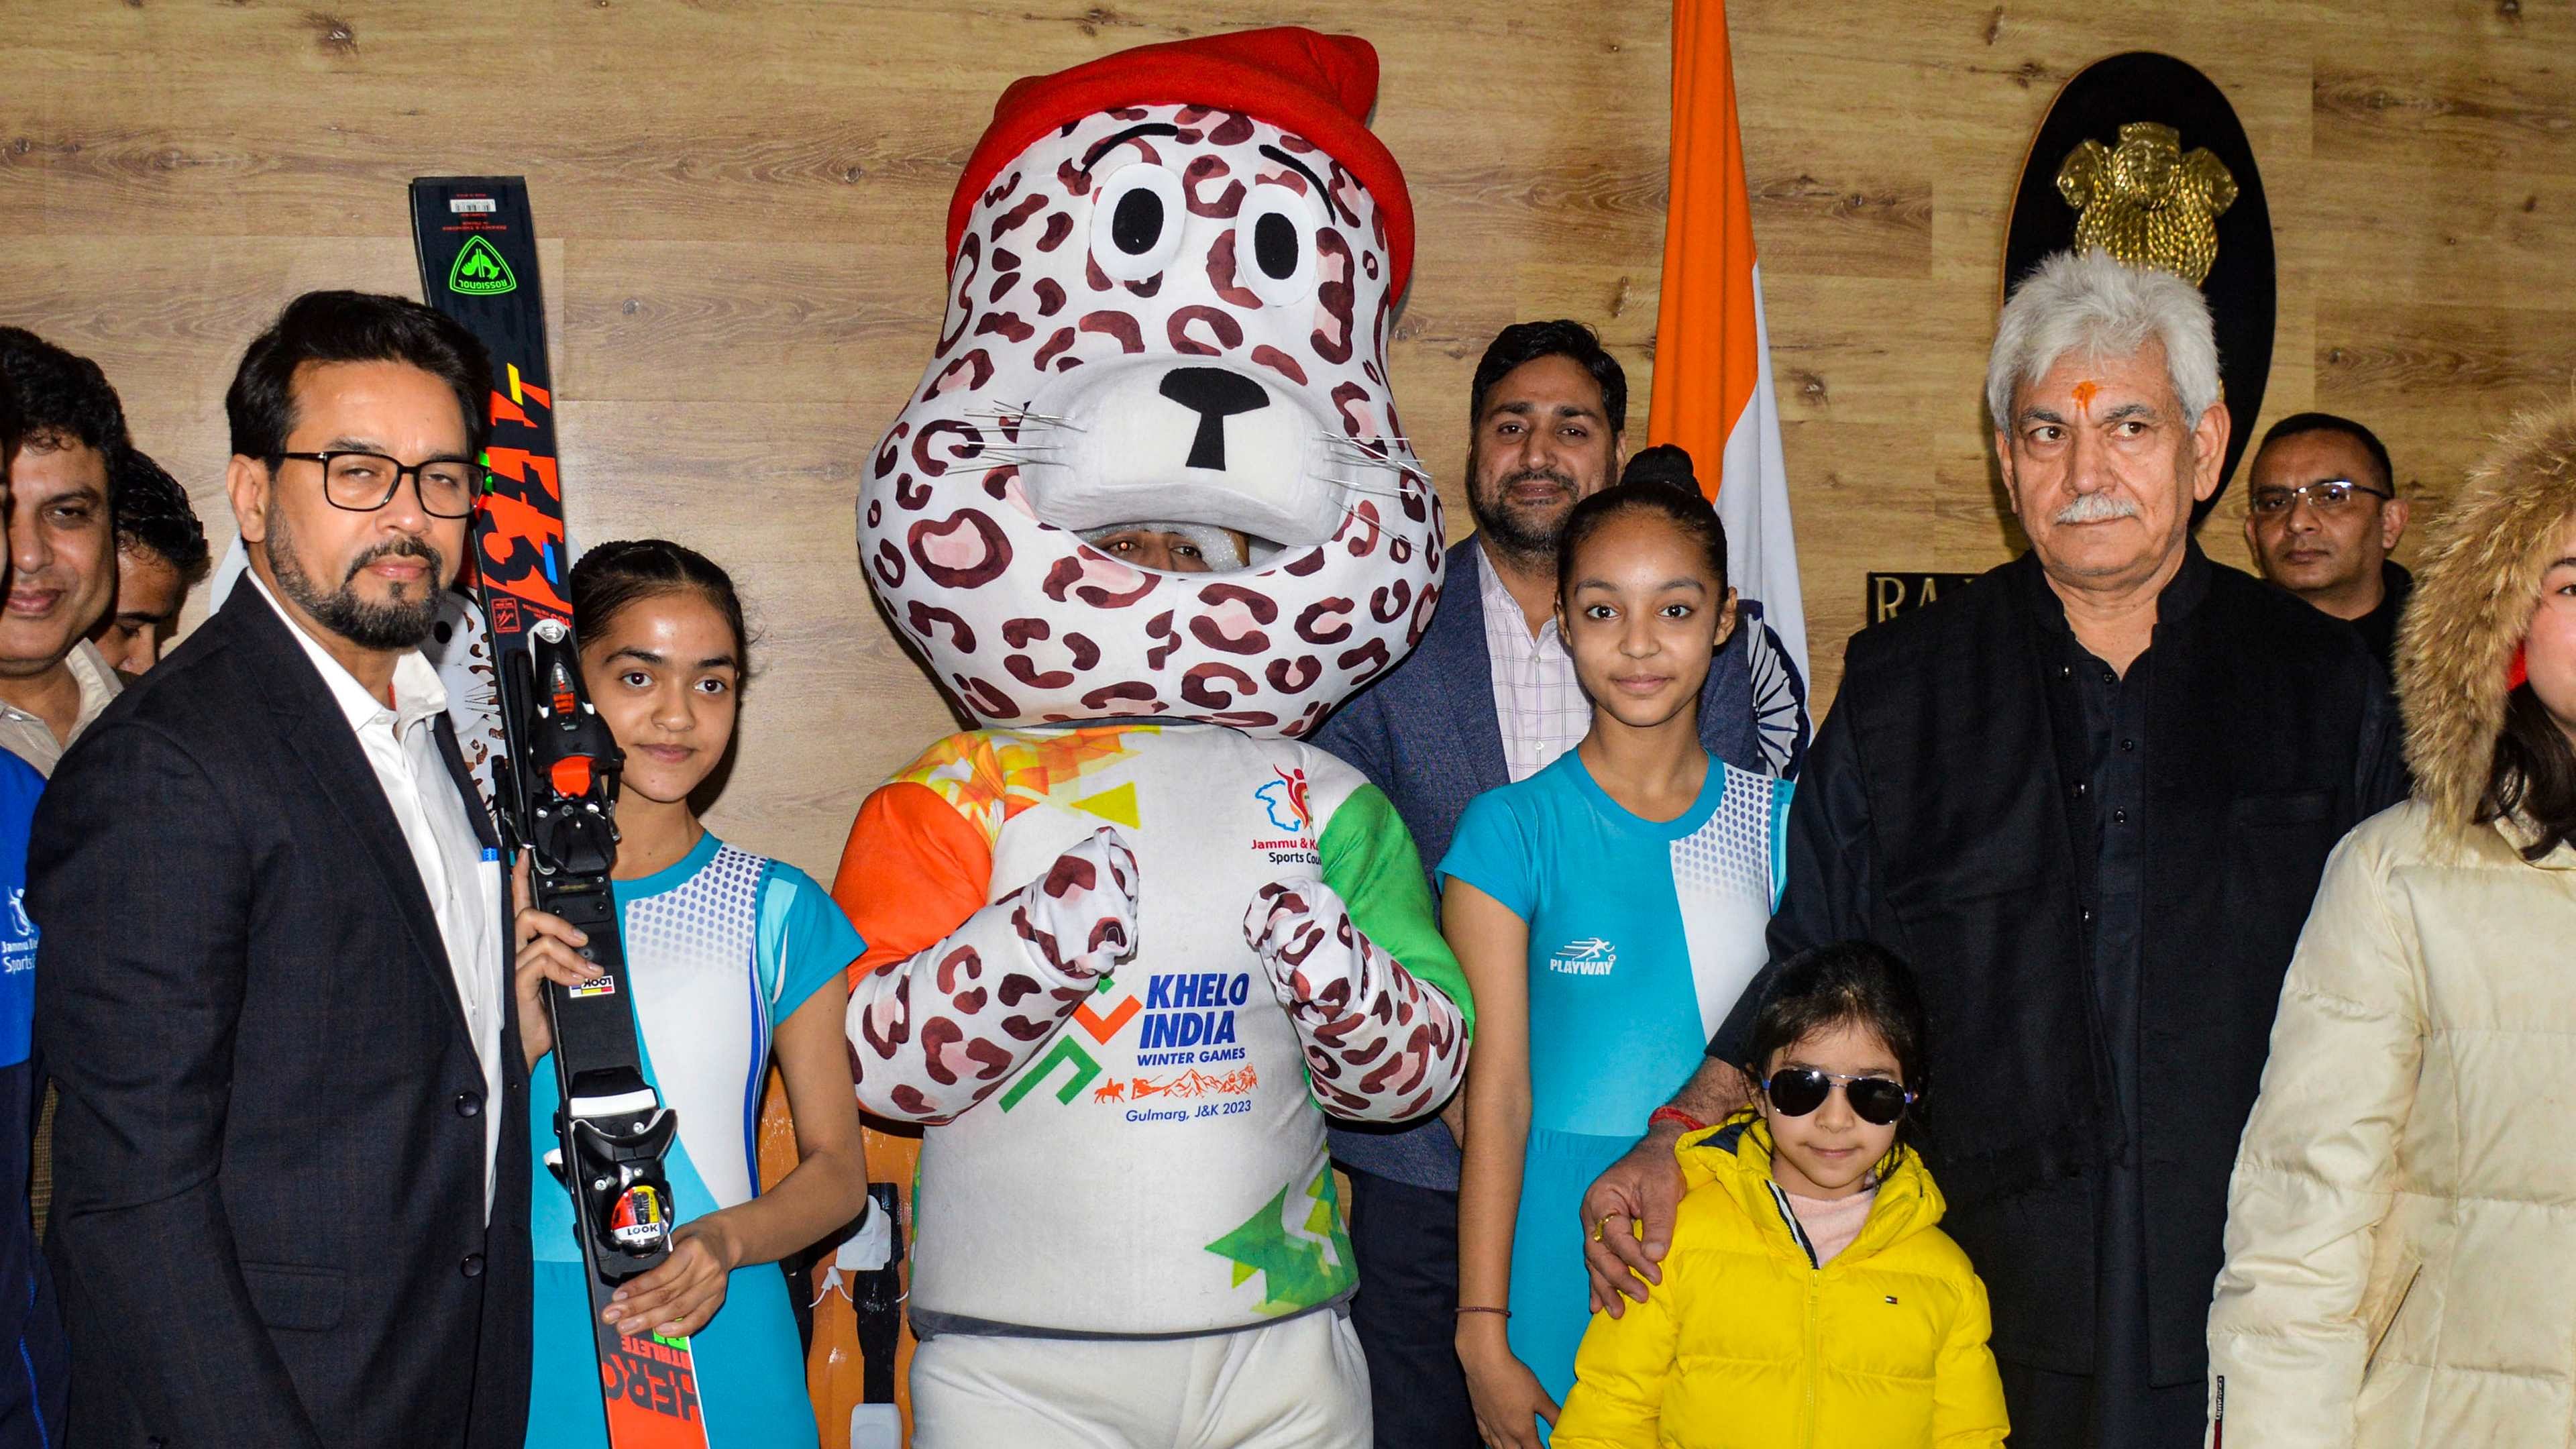 Anurag Thakur (L) and J&K Lt. Governor launch the mascot of the 3rd edition of Khelo India Winter Games. Credit: PTI Photo